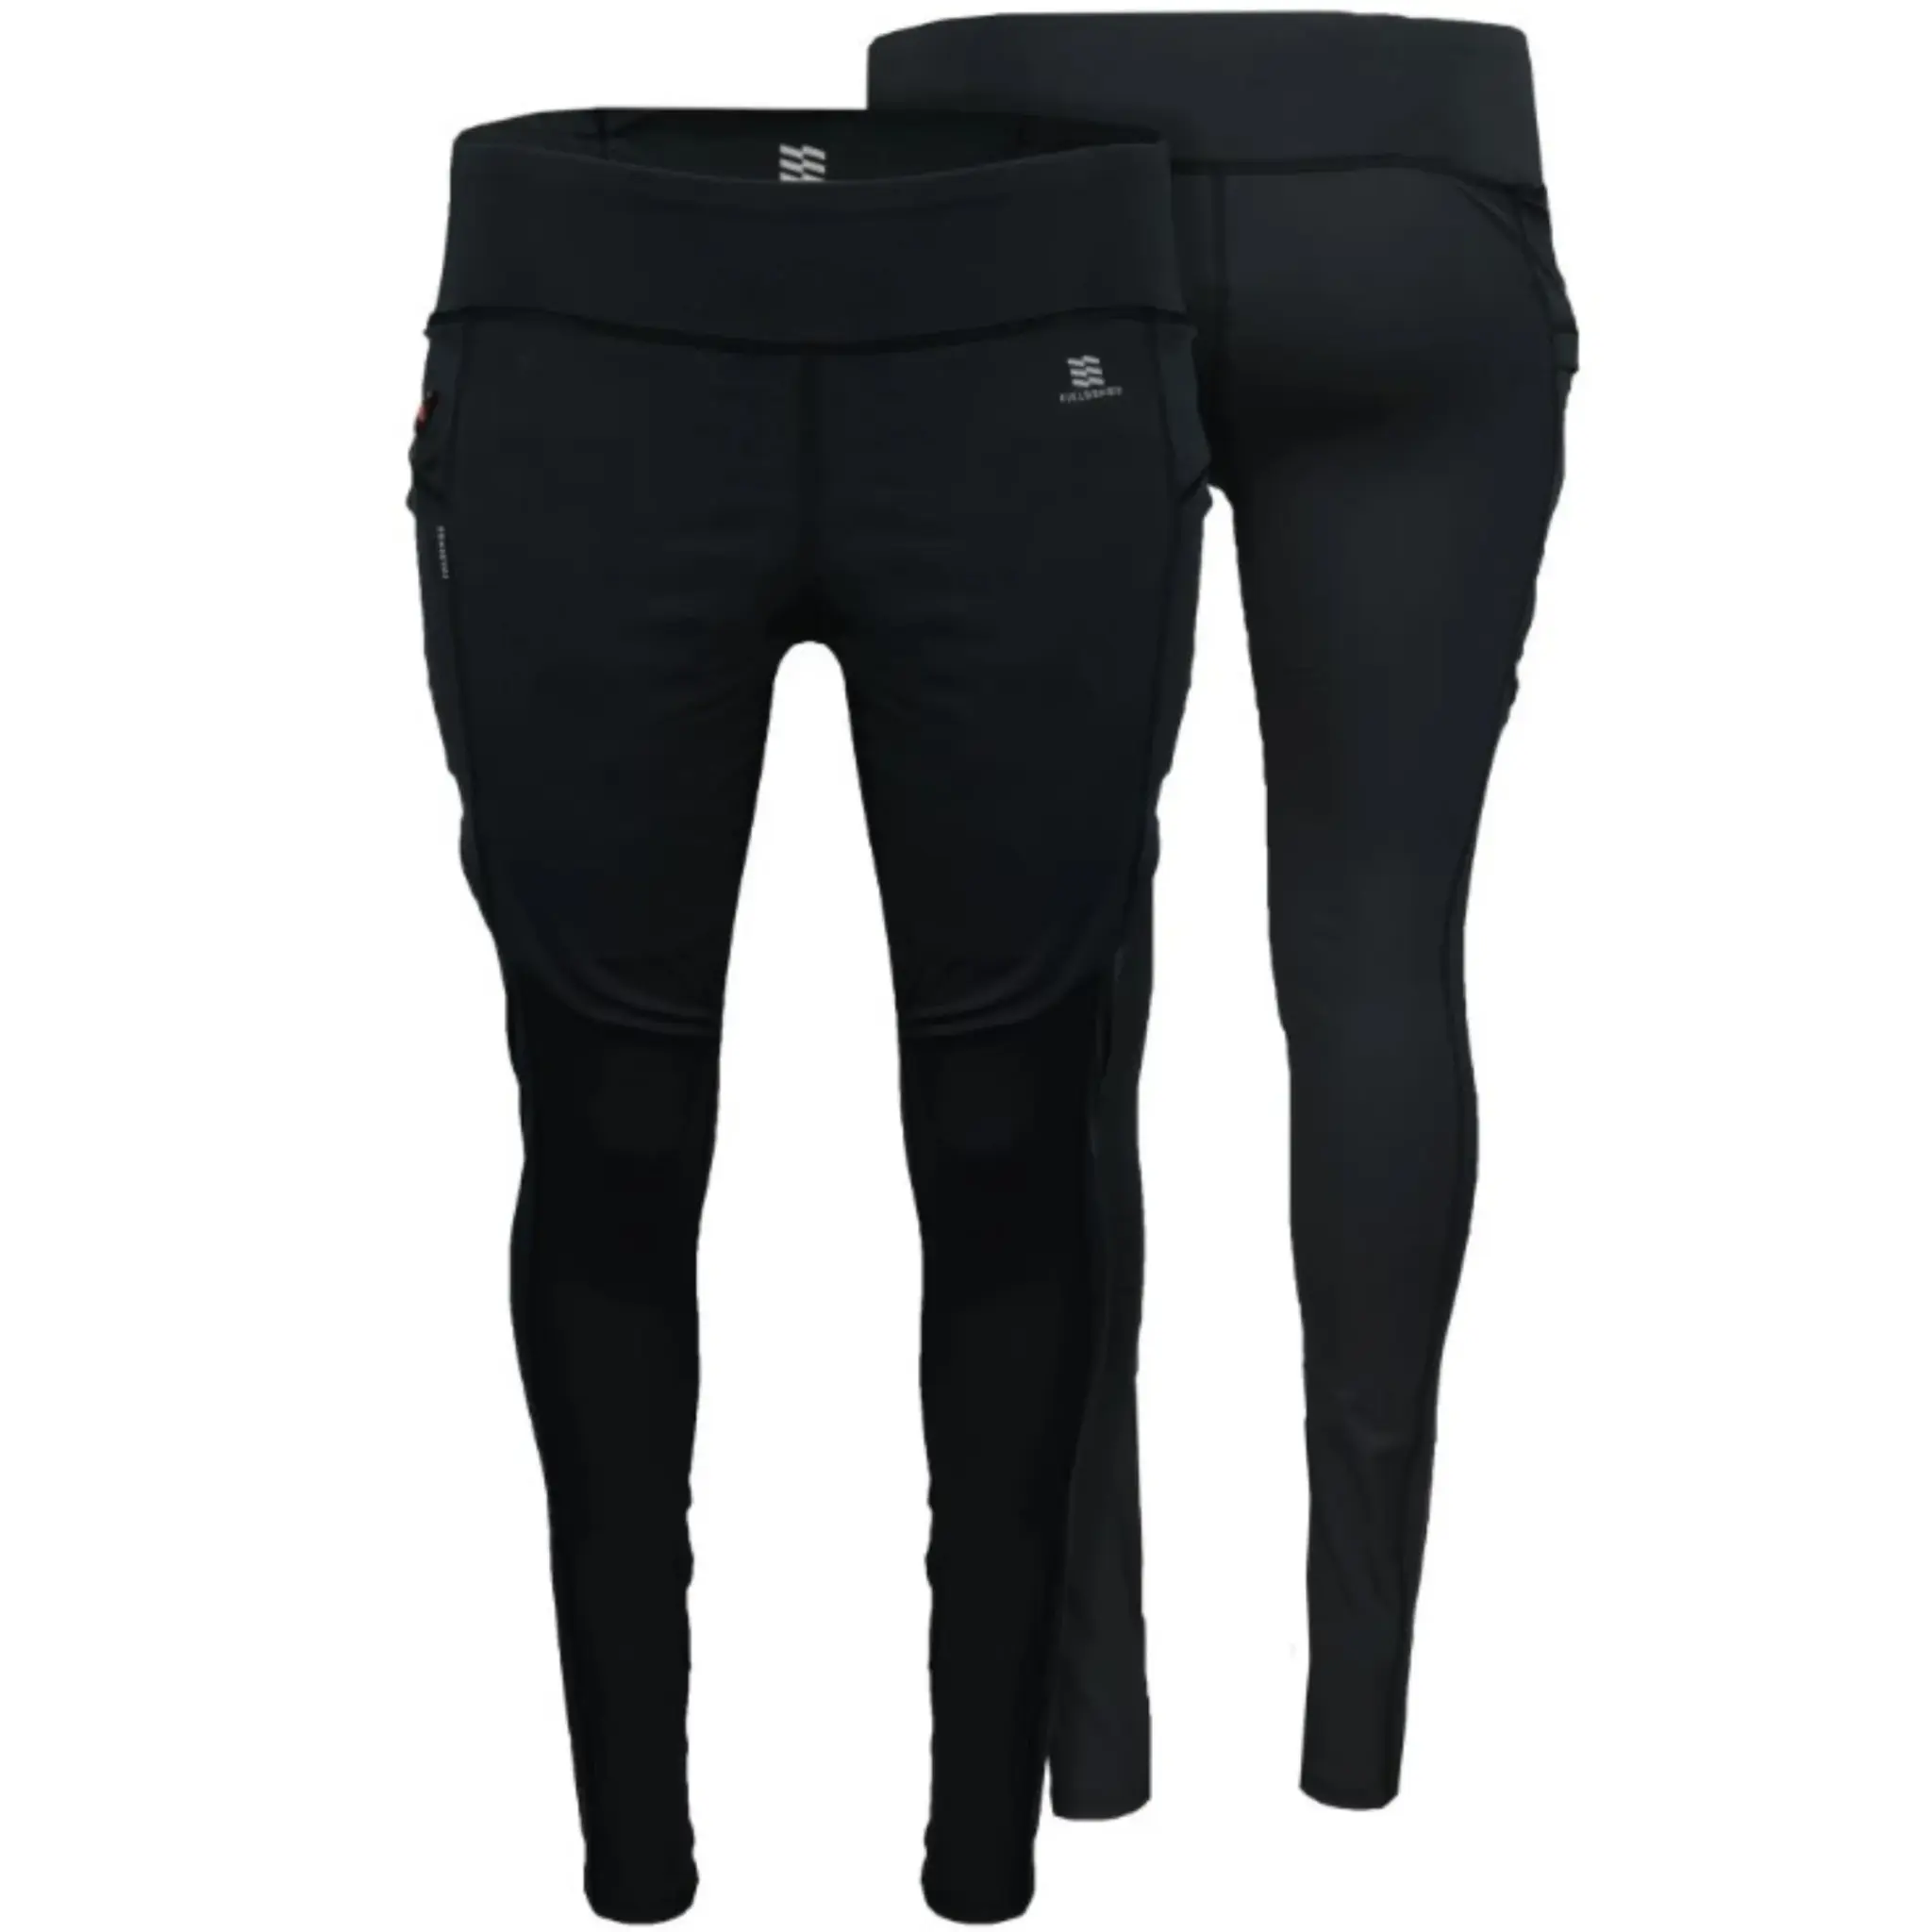 Mobile Warming Womens 7.4V Ion Heated Pants